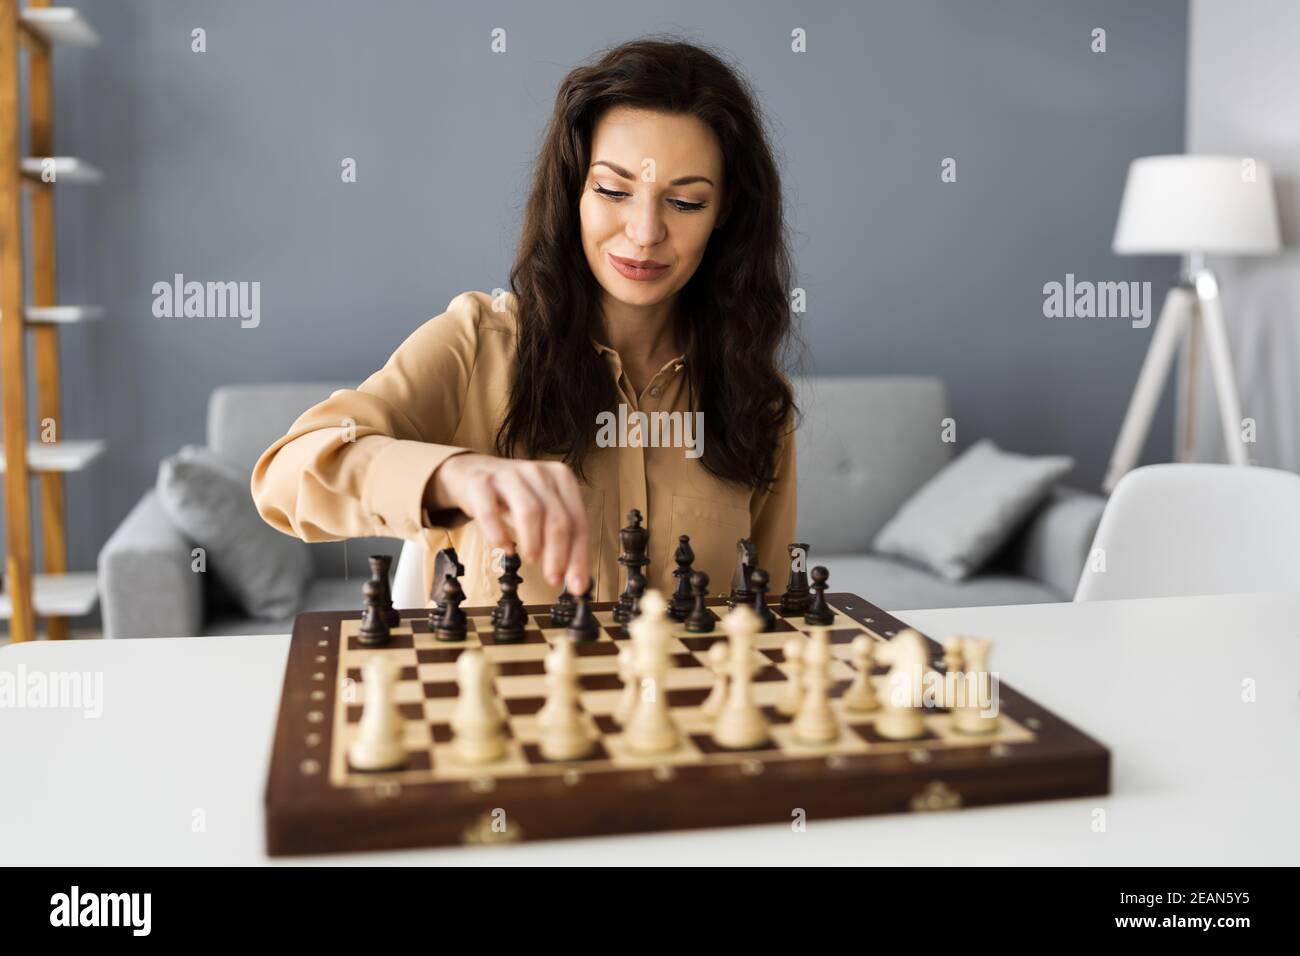 Woman Playing Chess Online Stock Photo